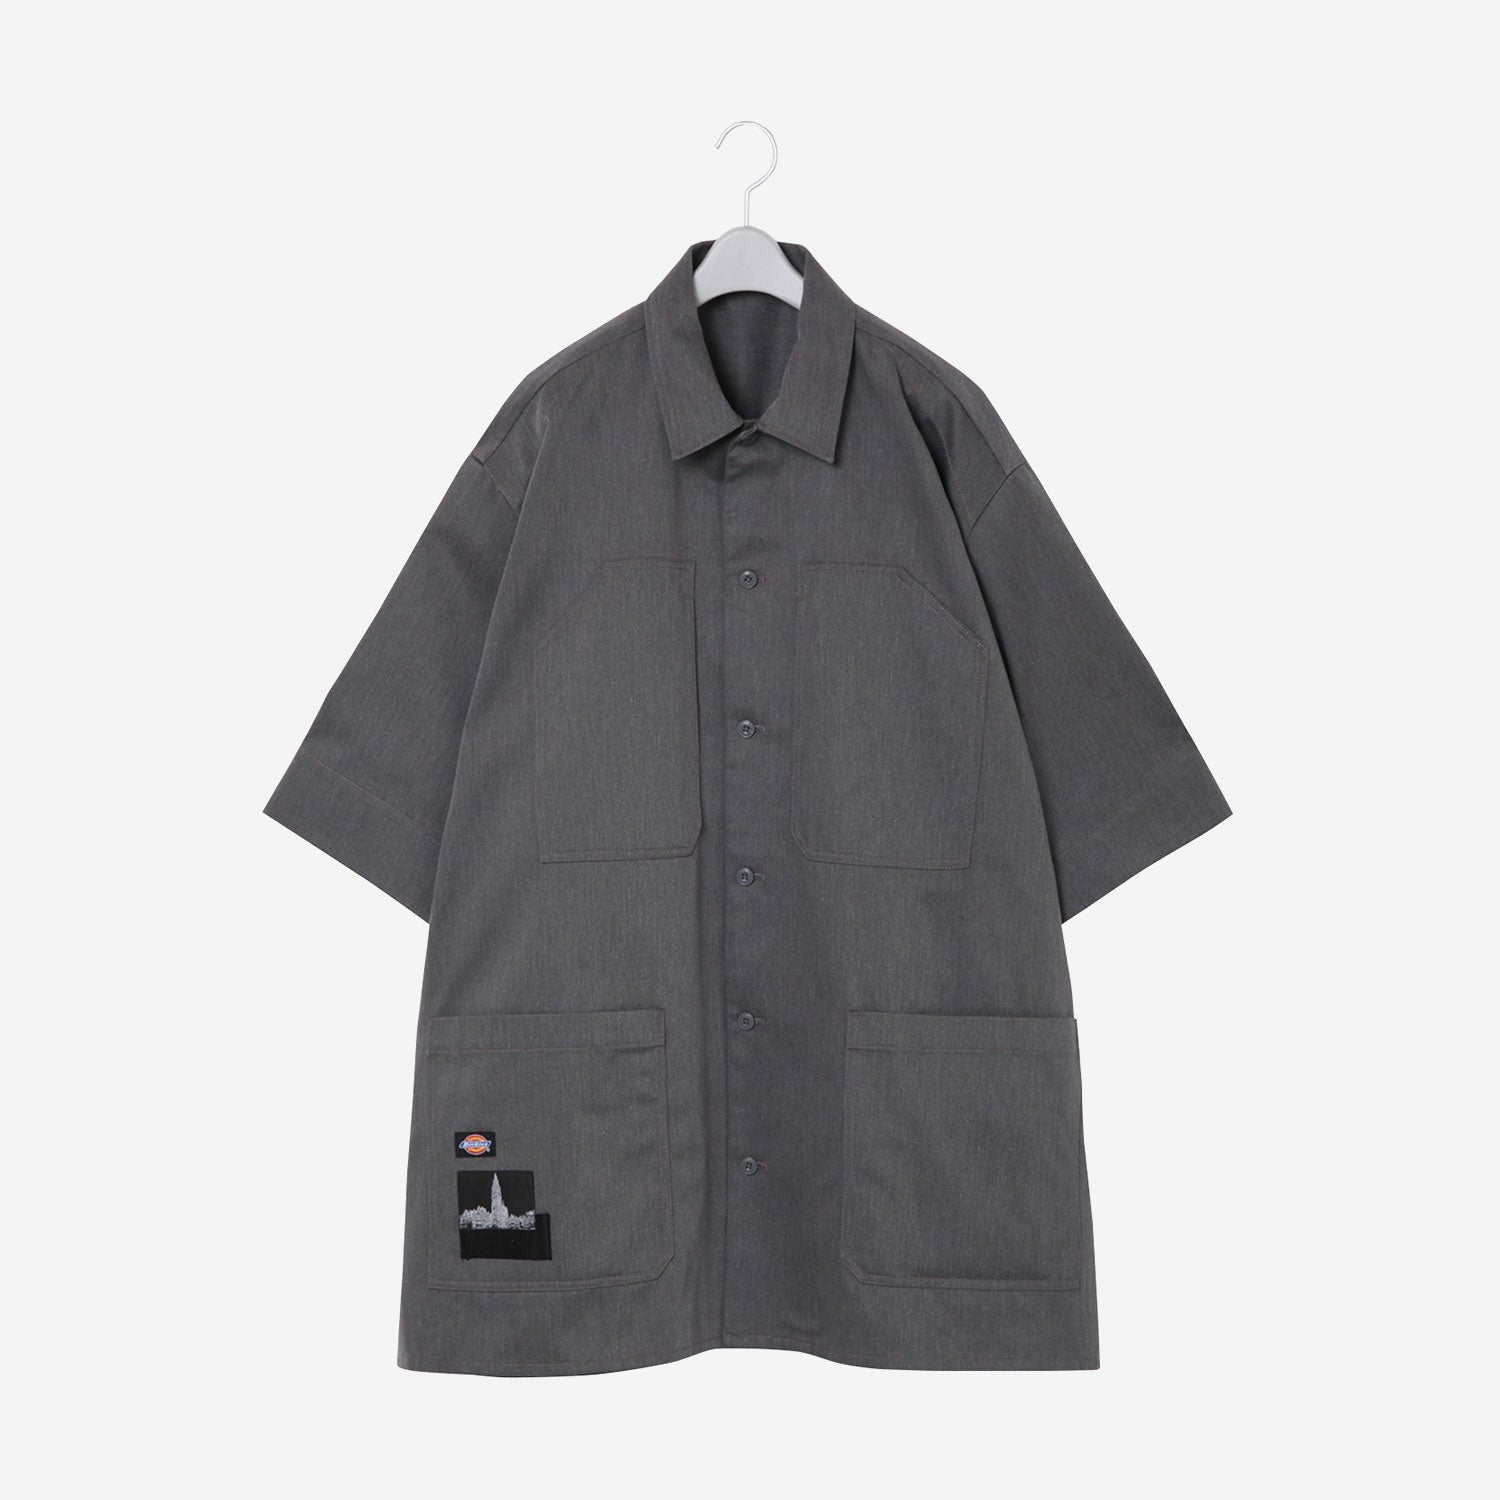 th products×Dickies Oversized Shirt